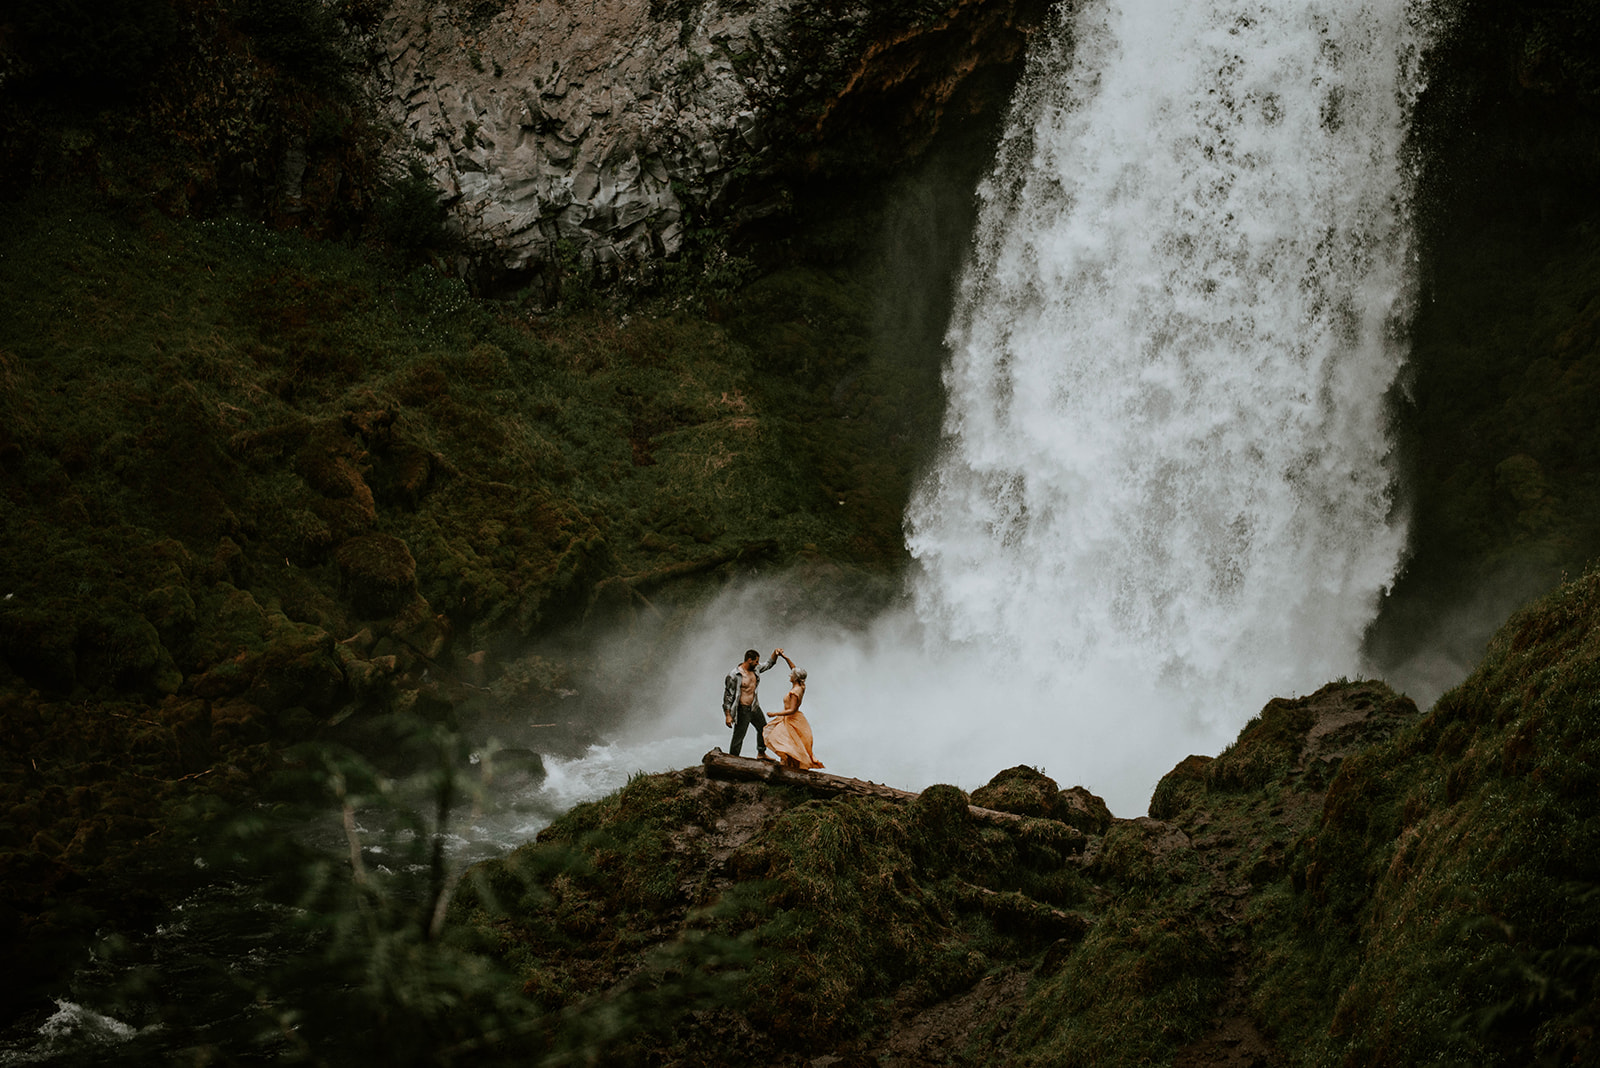 A couple dancing together at the base of a waterfall for their engagement photos